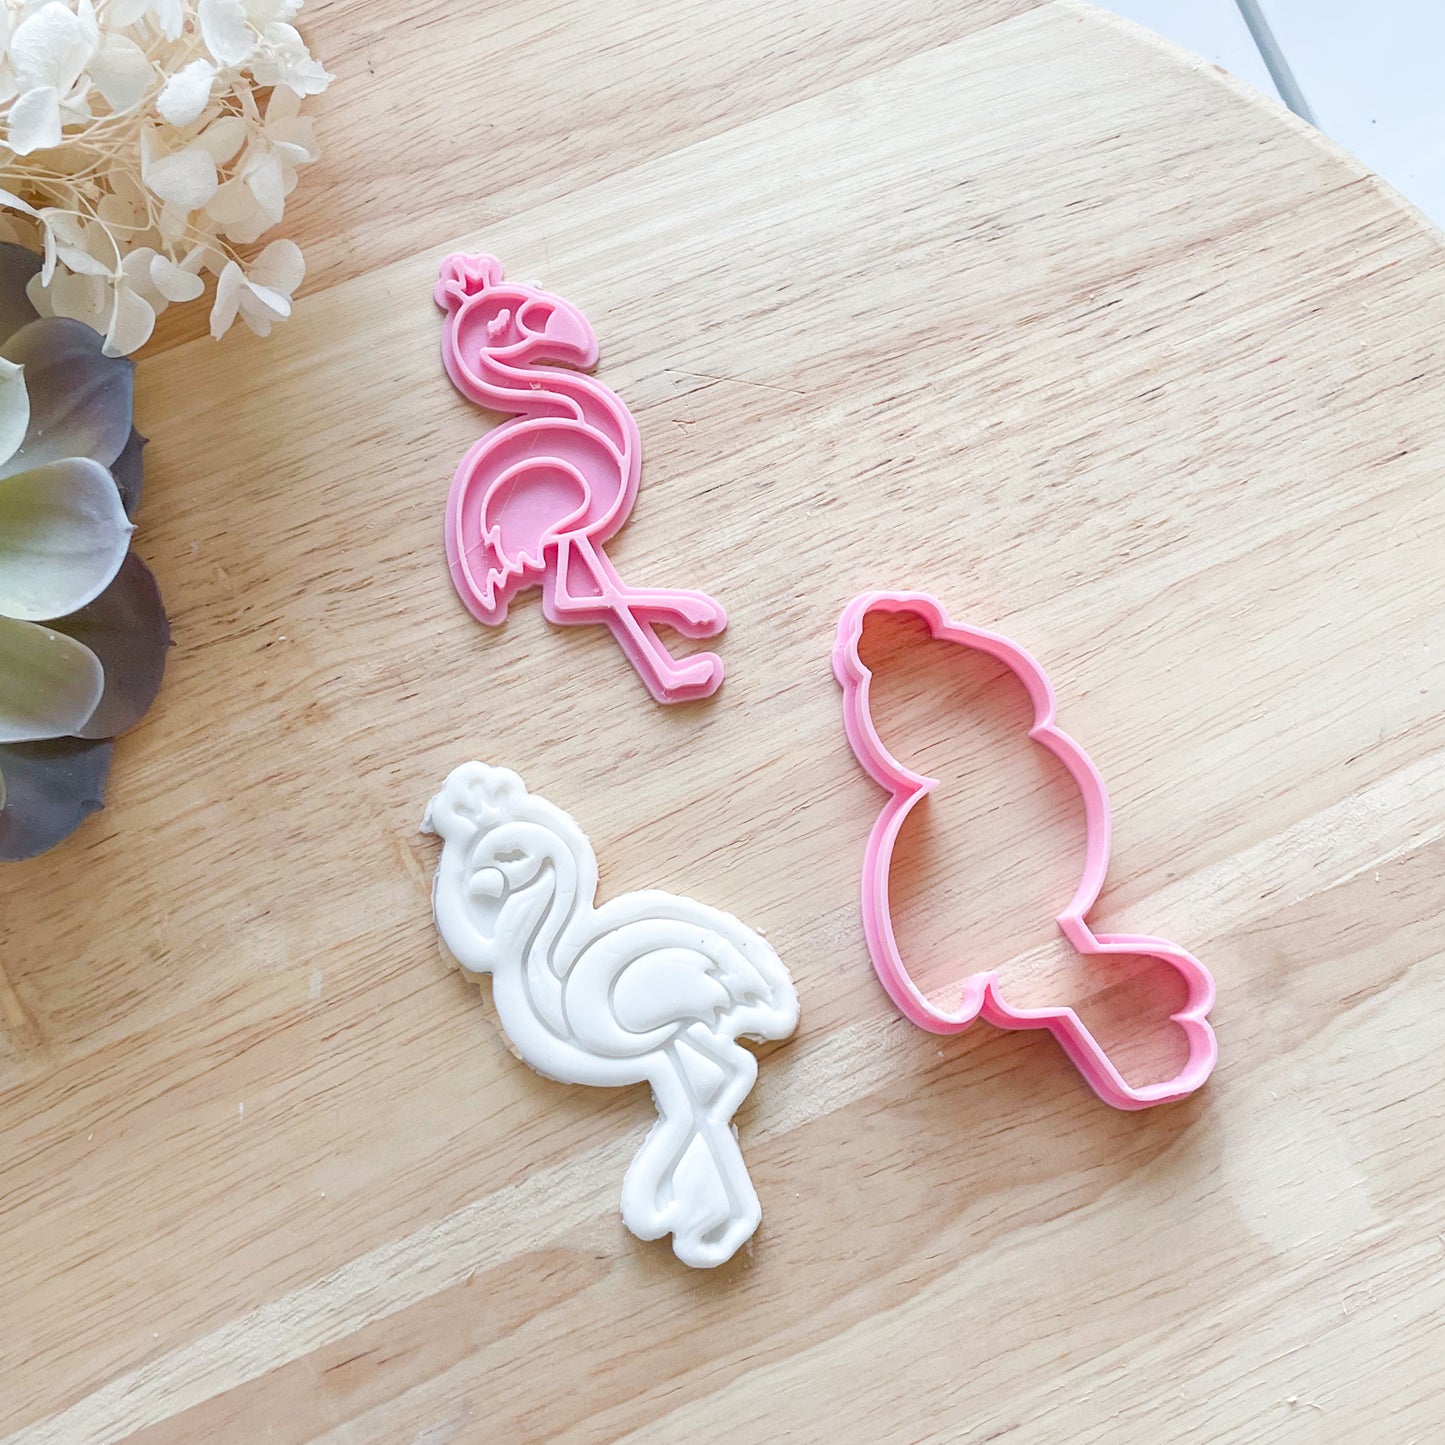 "Flamingo" - Cookie Cutter & Stamp